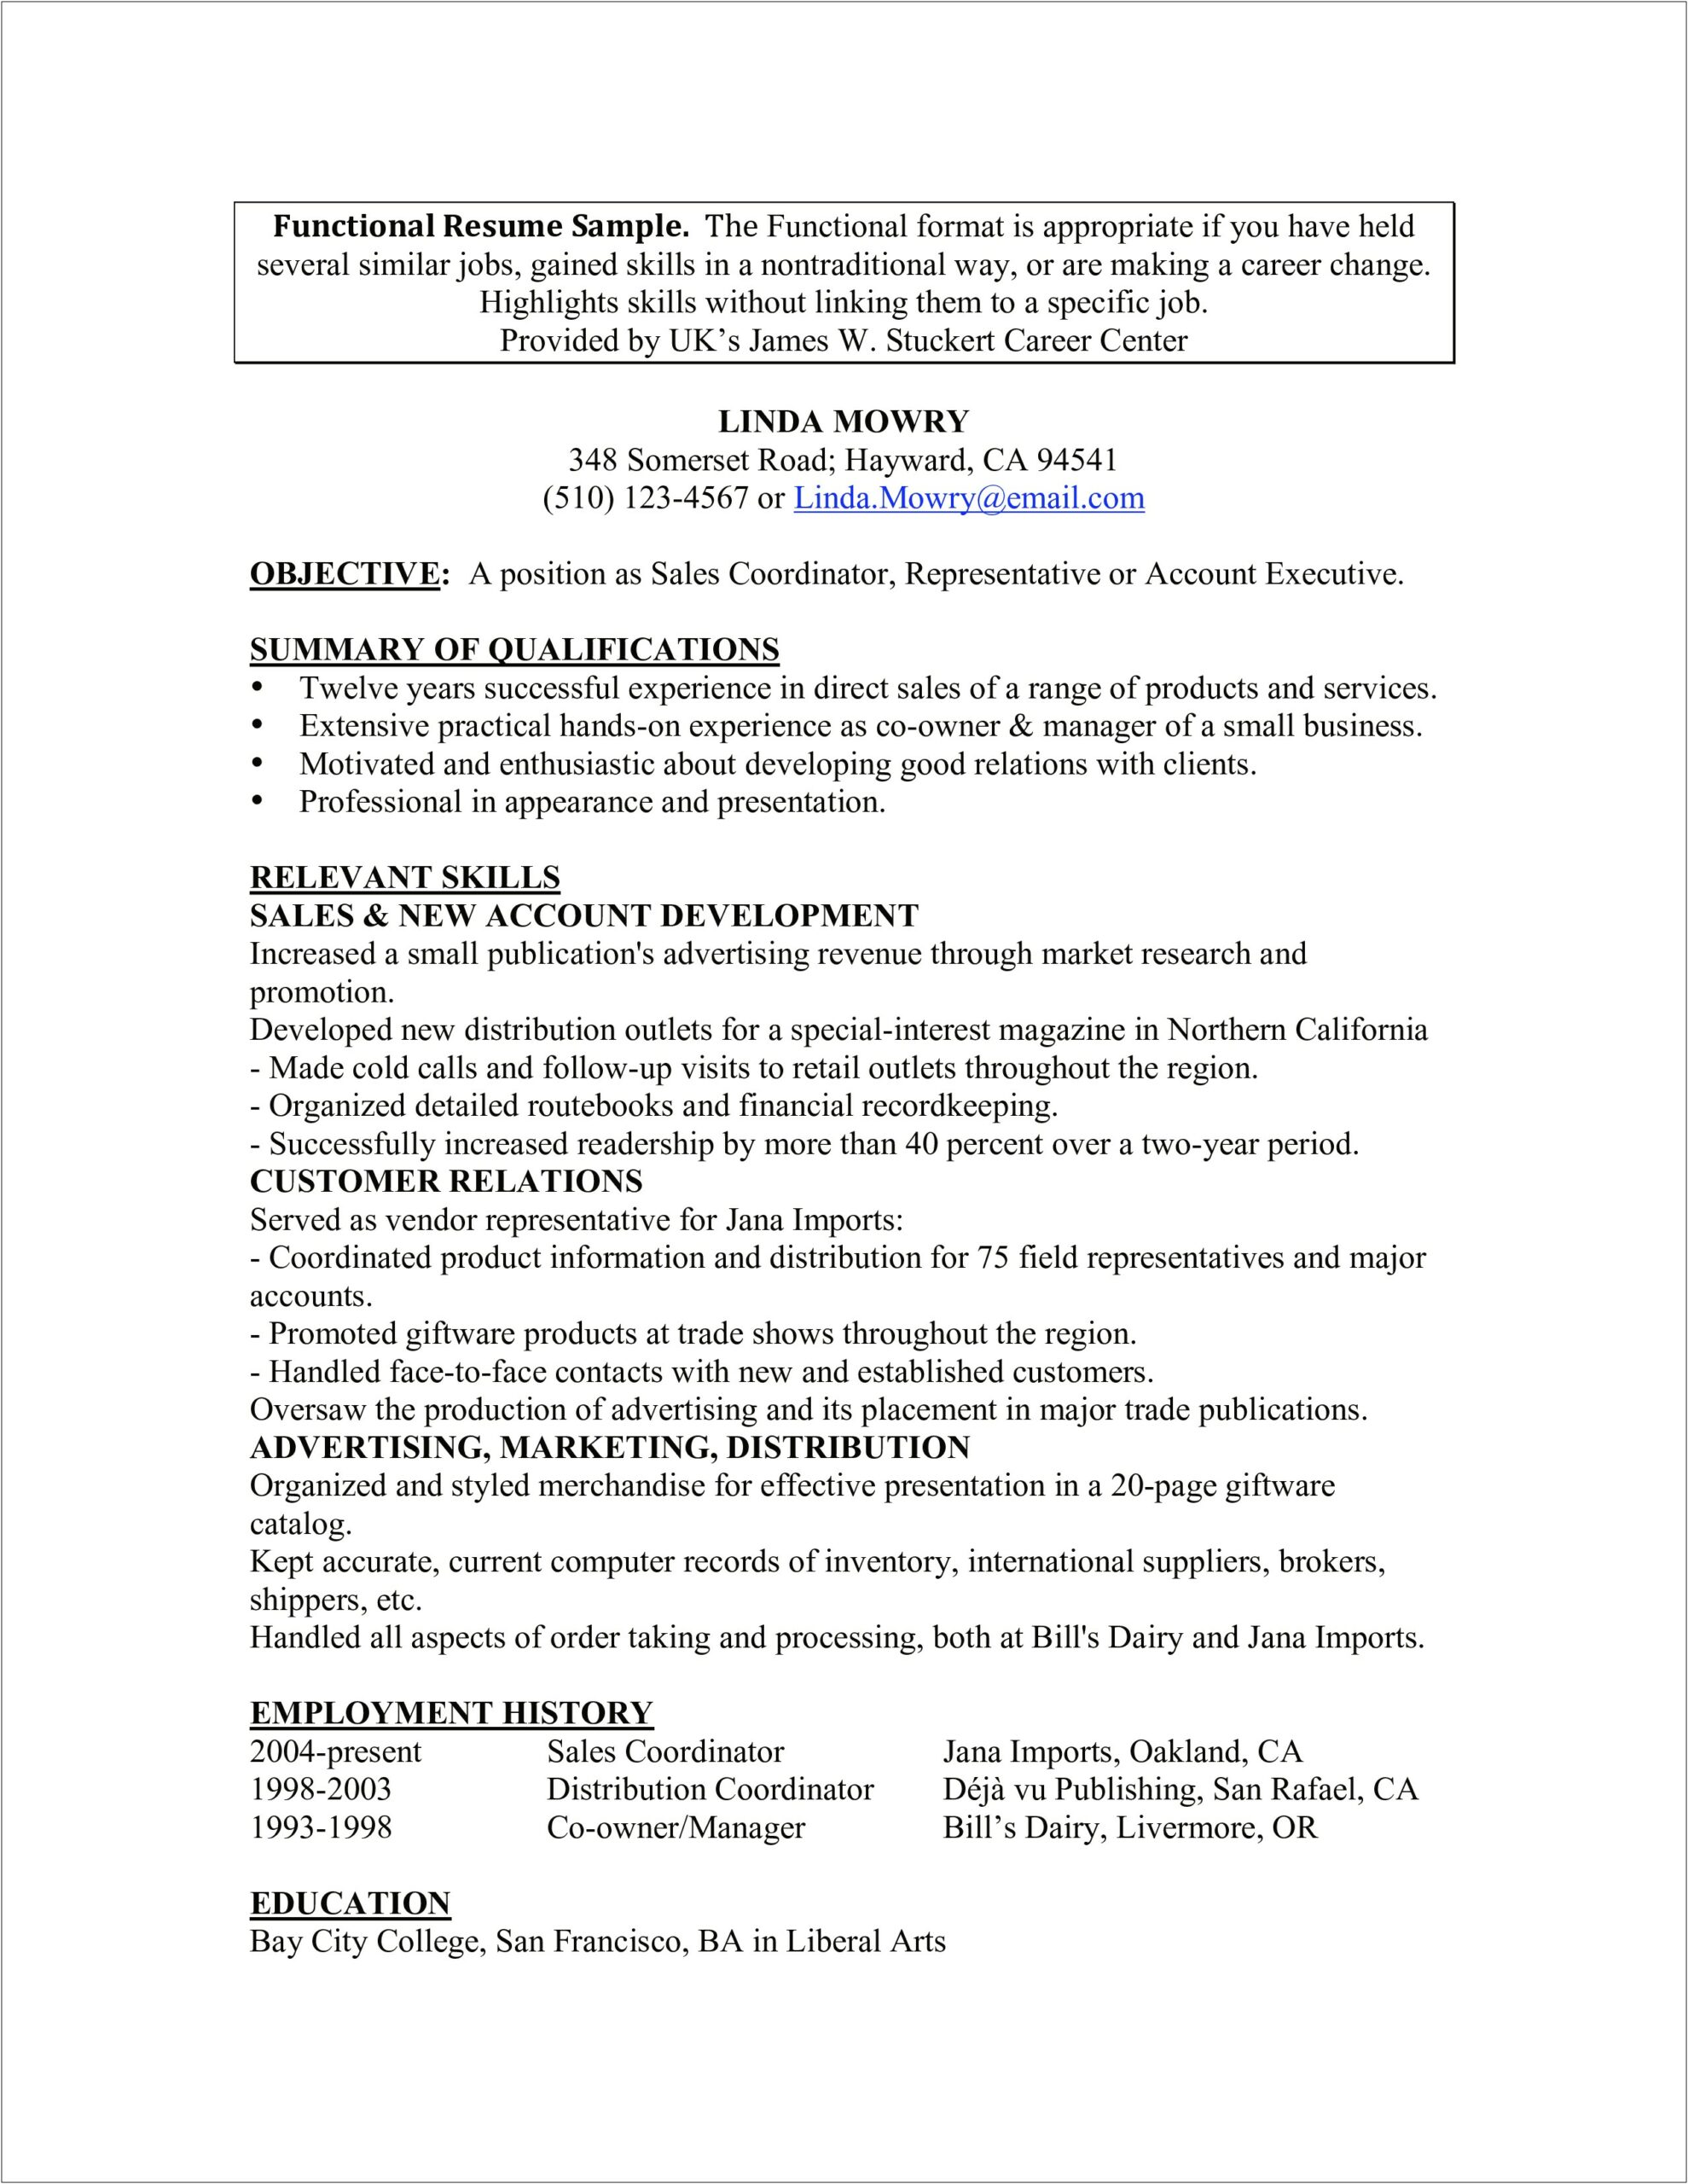 Resume For Sales Jobs Examples